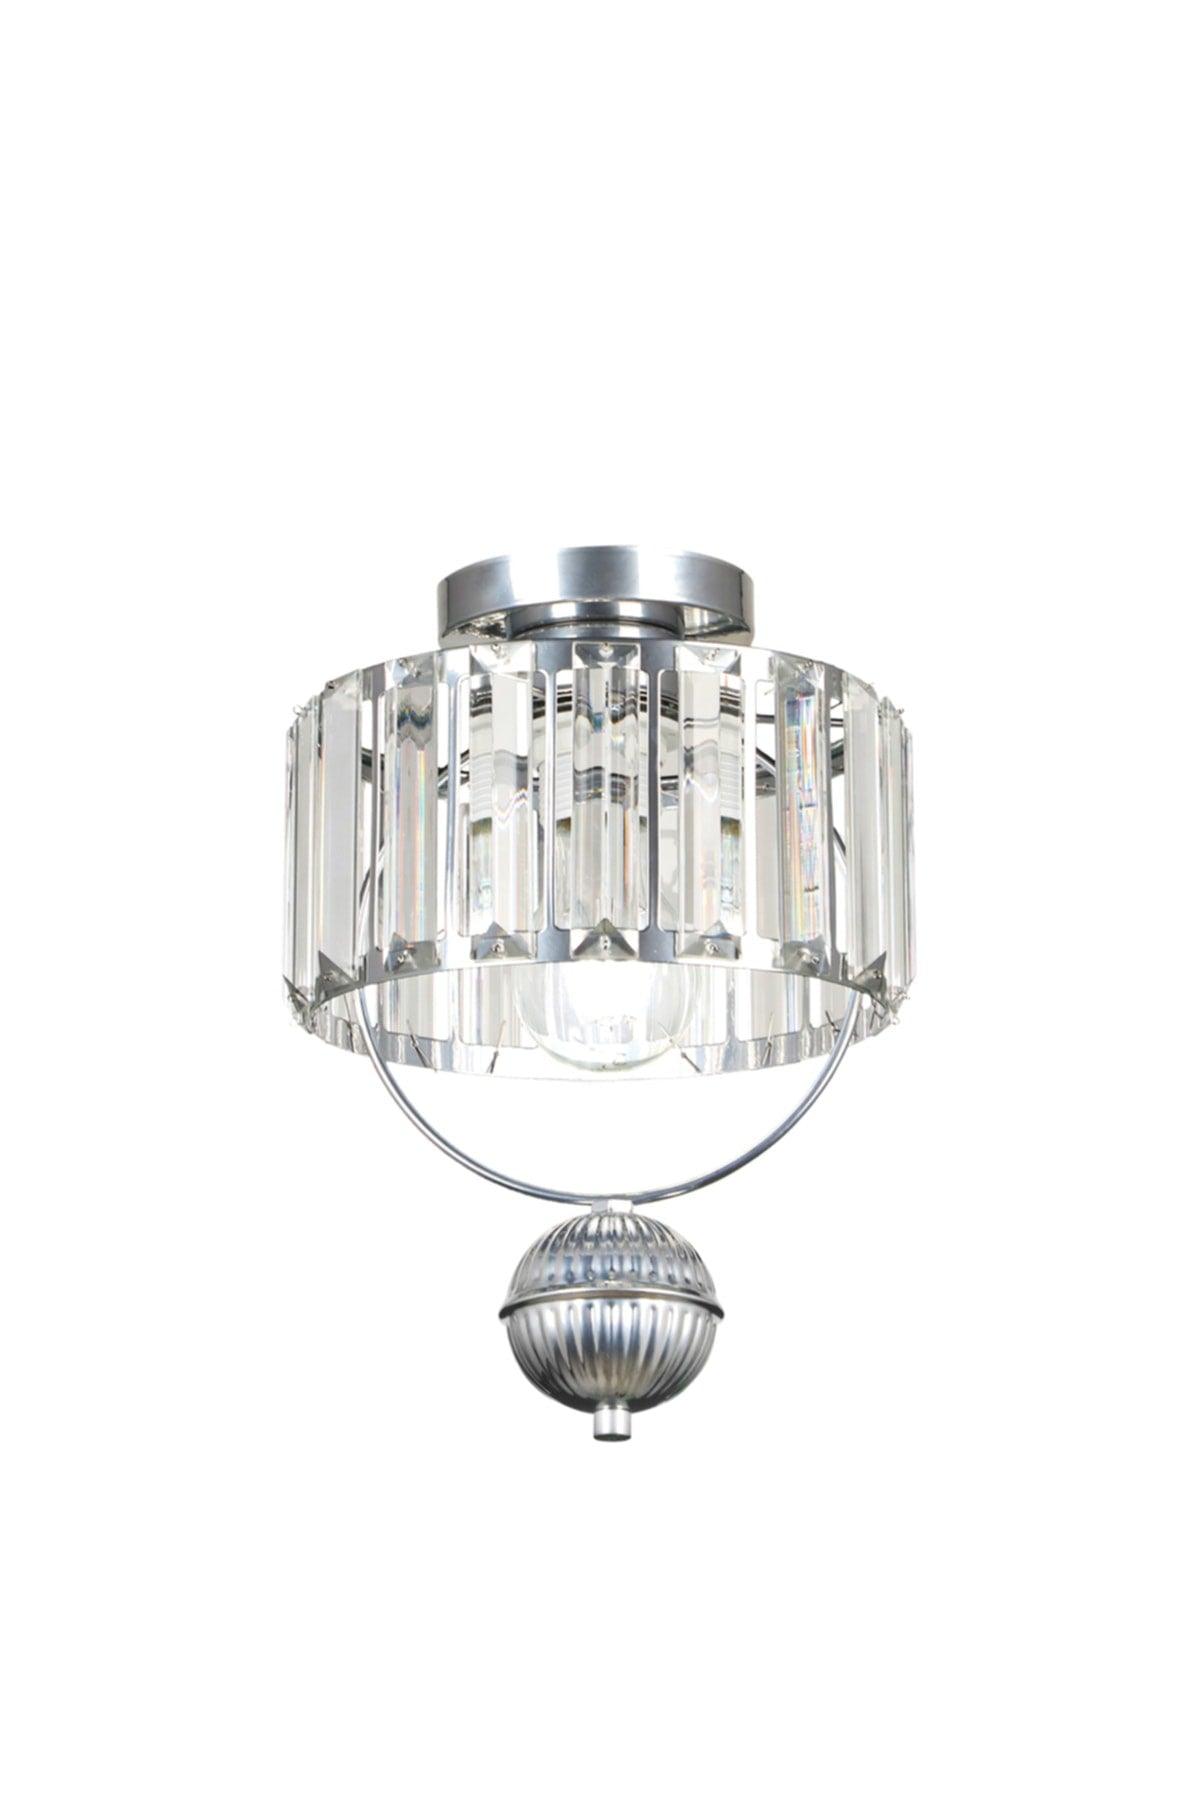 Gallon Ceiling Lux Crystal Assembly Single Chandelier Chrome - Swordslife